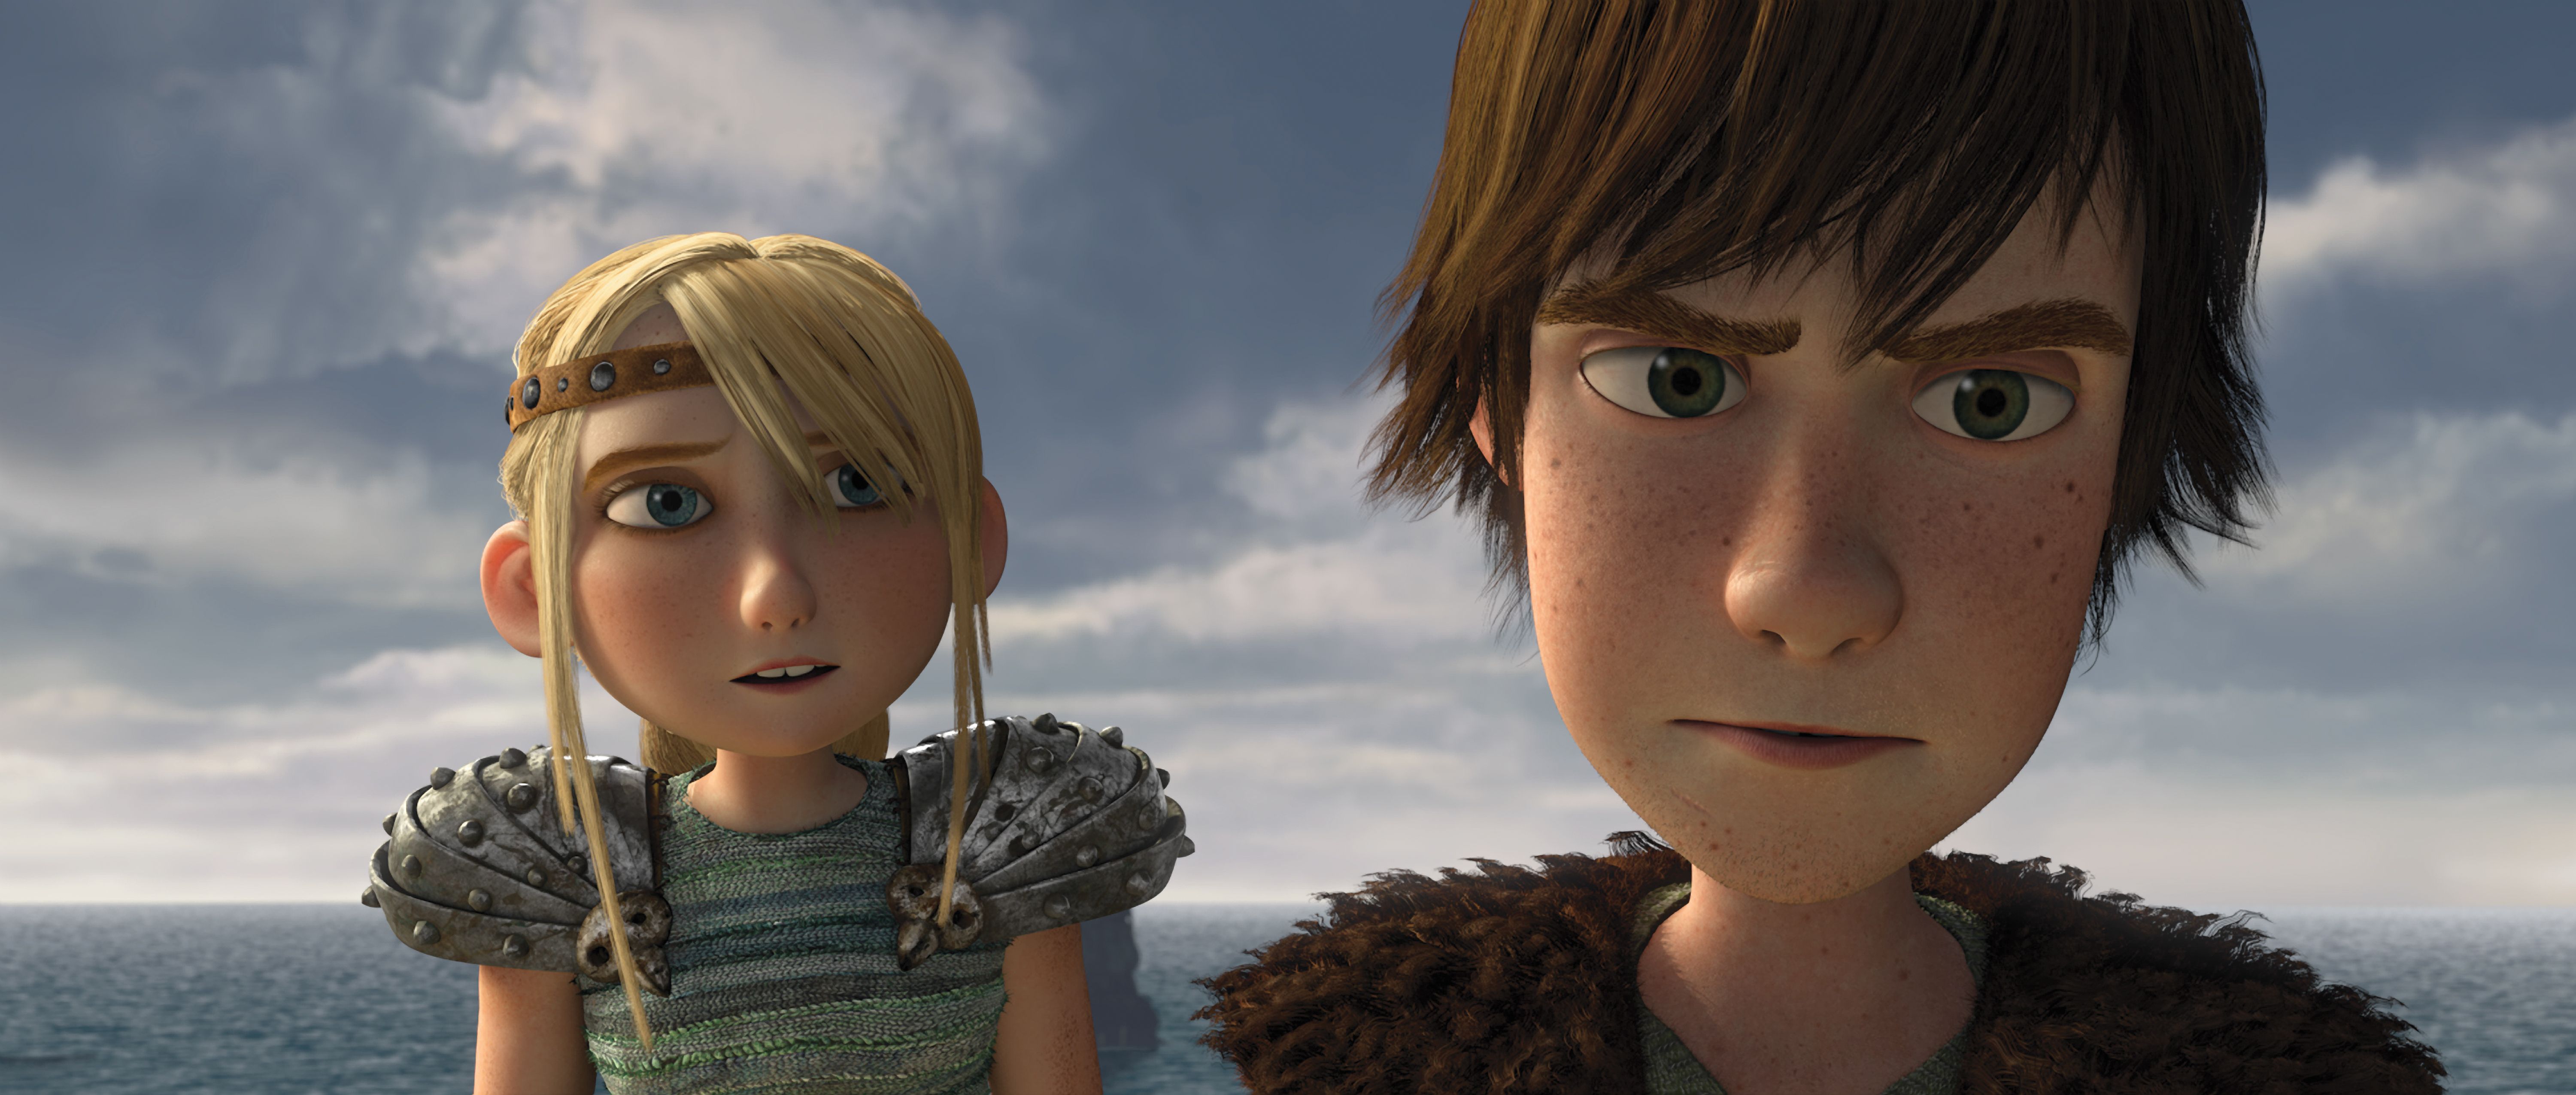 How to Train Your Dragon 2 plot details emergeDirector {0} has revealed new details about DreamWorks Animation's {1}, the sequel to 2010's {2}.